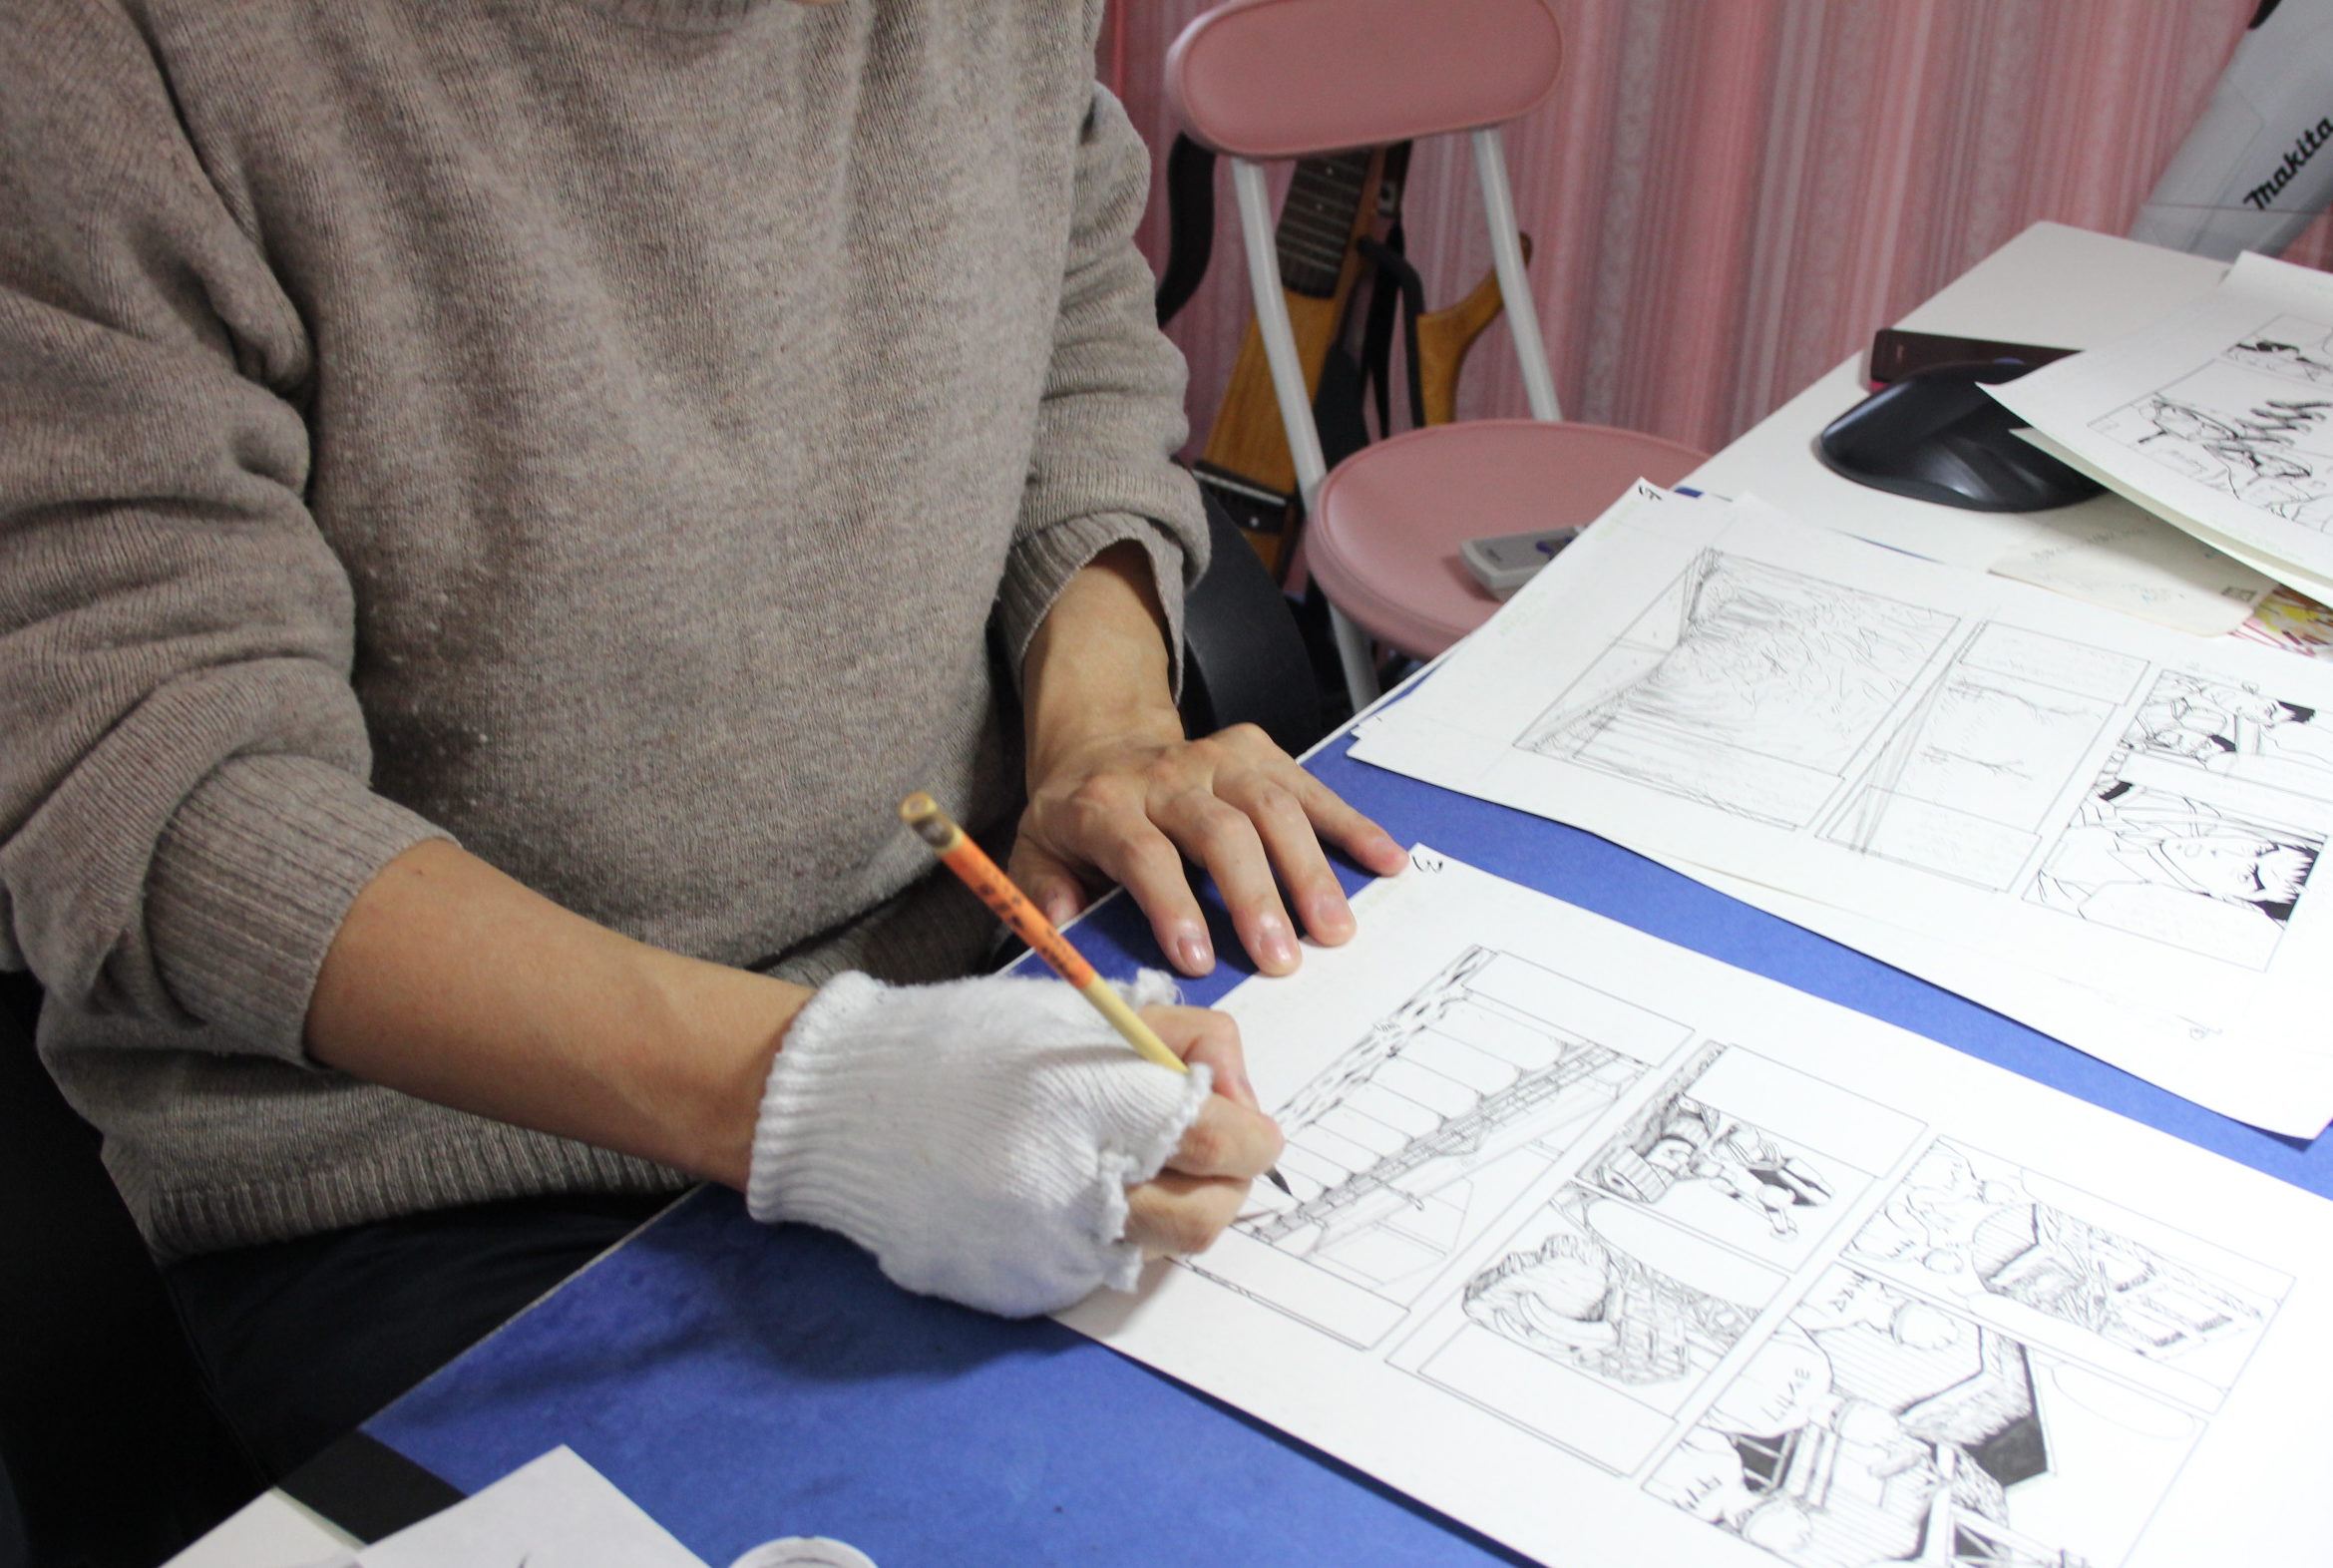 Kazuto Tatsuta, who has been involved in decommissioning work at the Fukushima No. 1 nuclear plant, works on a new manga story at his office in a Tokyo suburb on Feb. 16. | KYODO